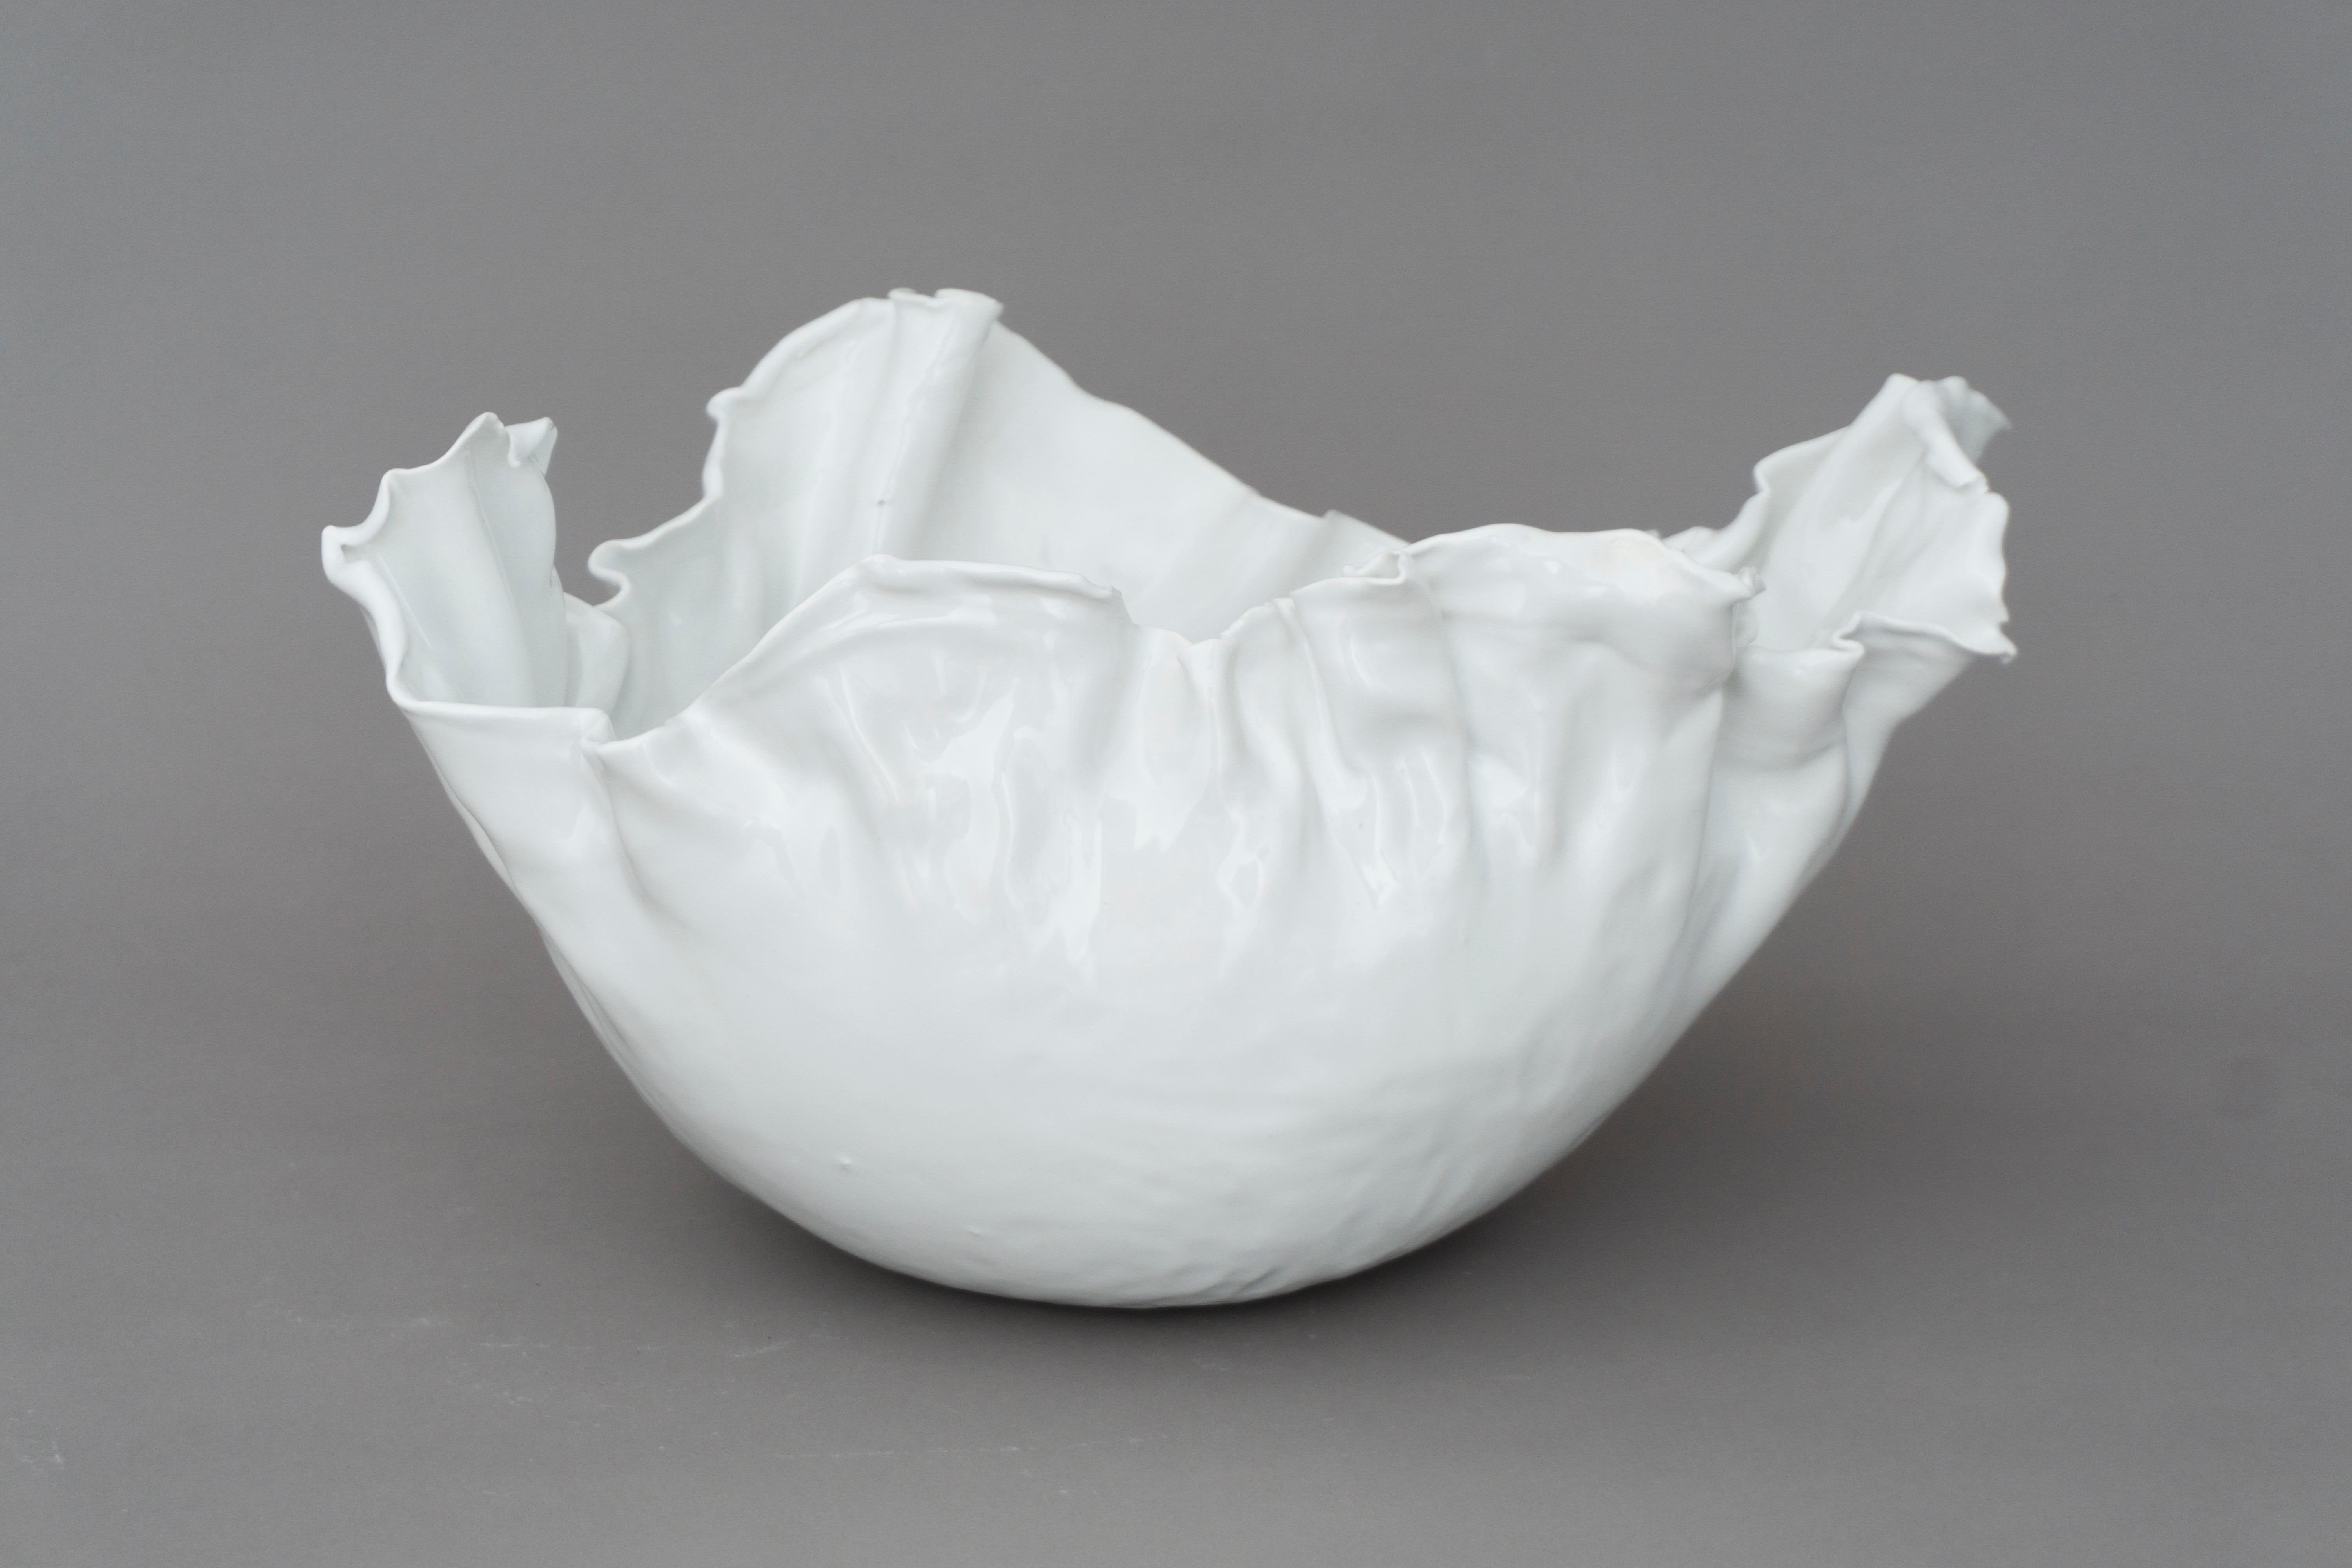 Unique porcelain bowl with a white glazing, a simple and elegant form. Made by Danish designer Christine Roland. 
A second version is available. 

'Christine Roland is a Berlin-based ceramicist, creating unique works of stoneware and